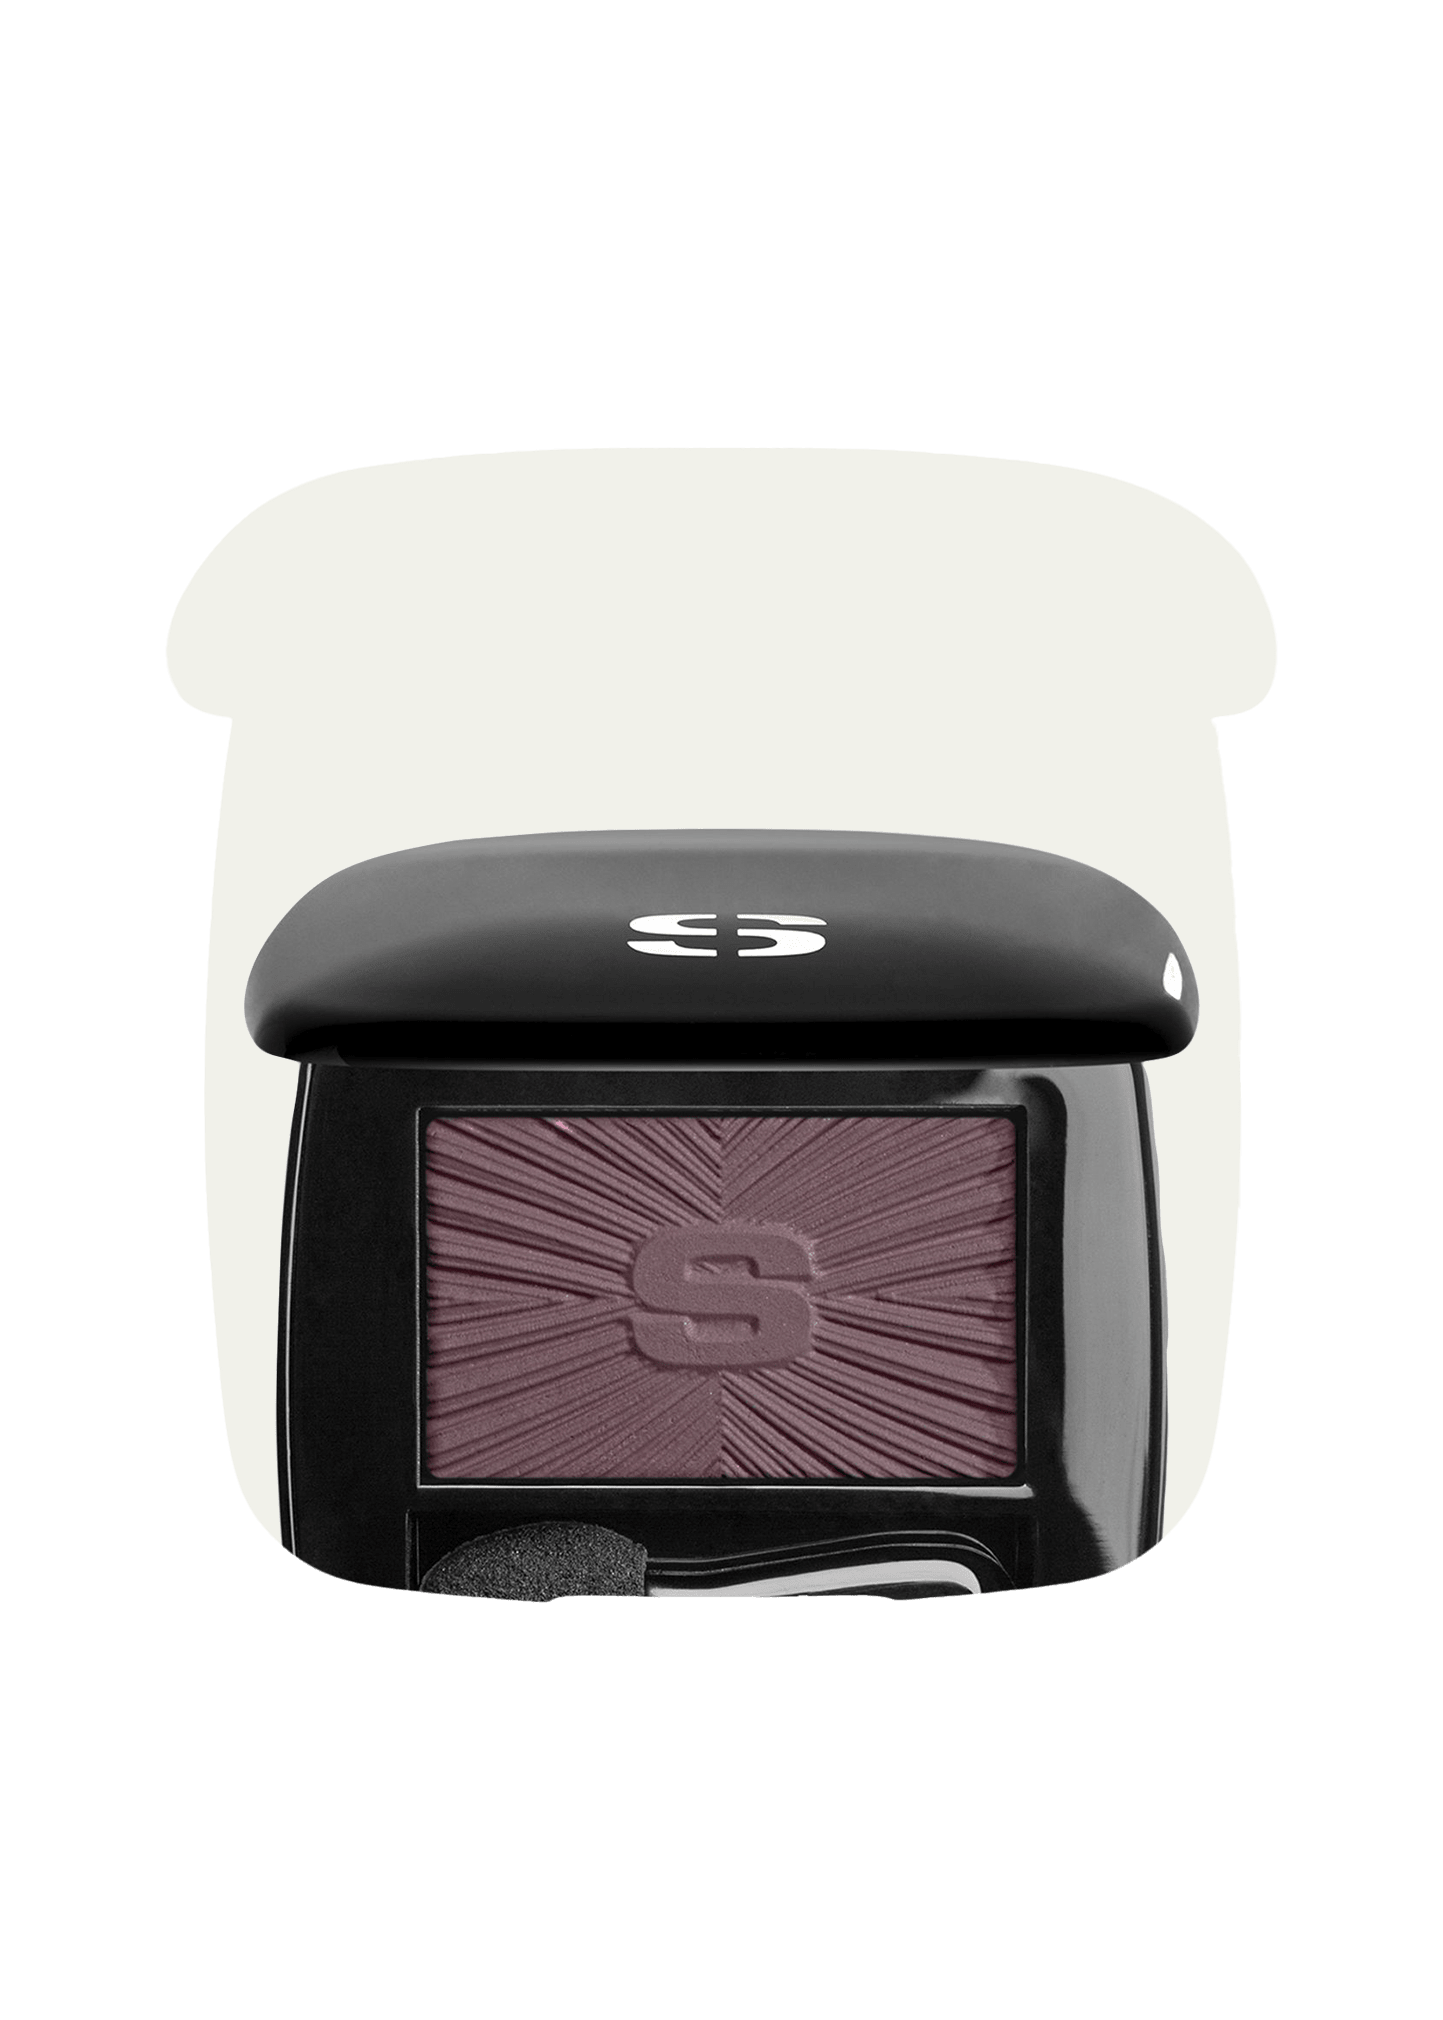 Sisley Paris Les Phyto Ombres Eyeshadow In 22 Matte Grape